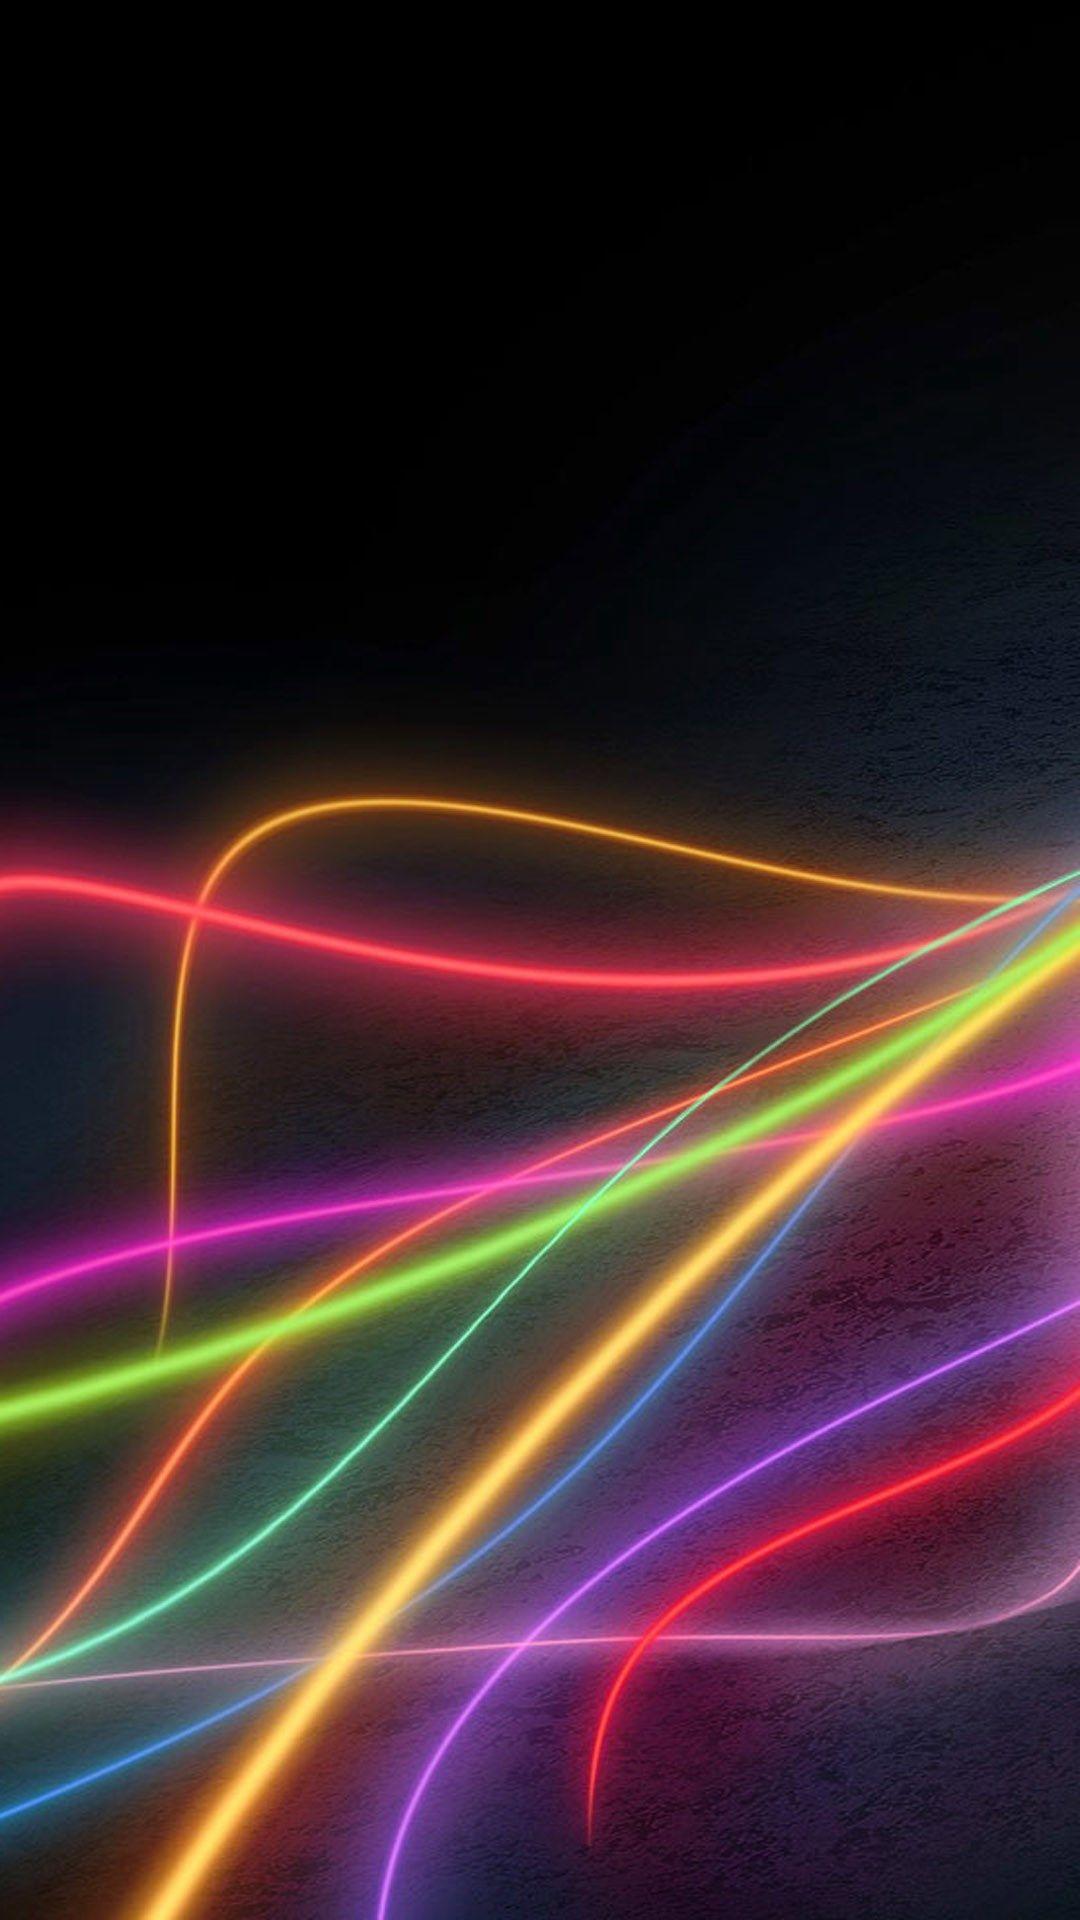 live wallpaper galaxy note 10.1 Wallppapers Gallery. Colorful